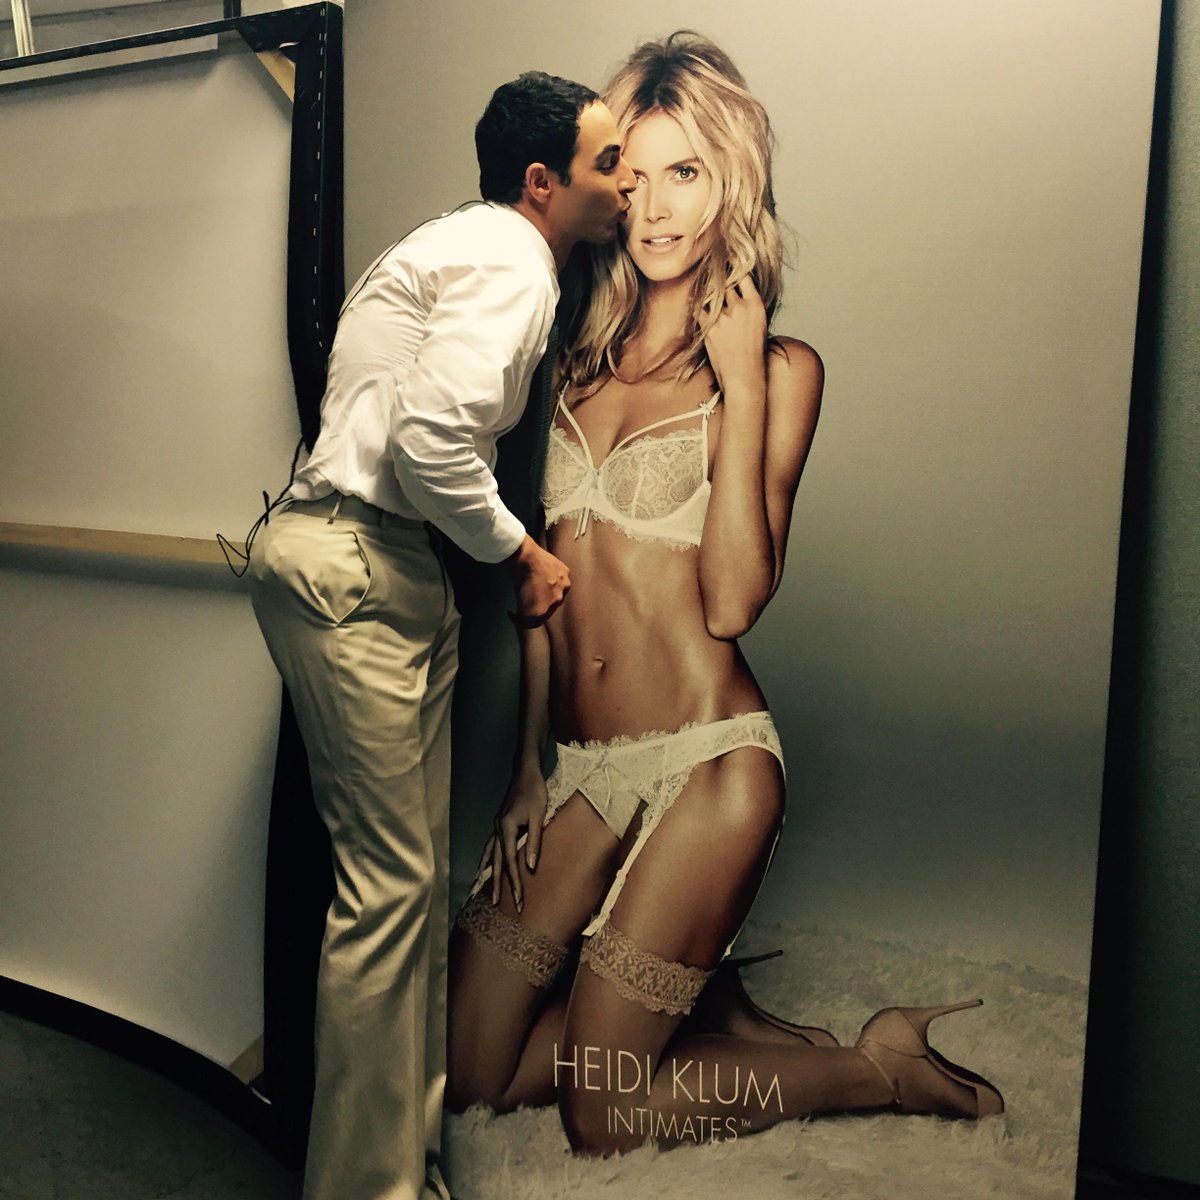 Muah @zac_posen!!  See what the designers make for @HKintimates on @ProjectRunway tonight! http://t.co/lxcrXt7WGj